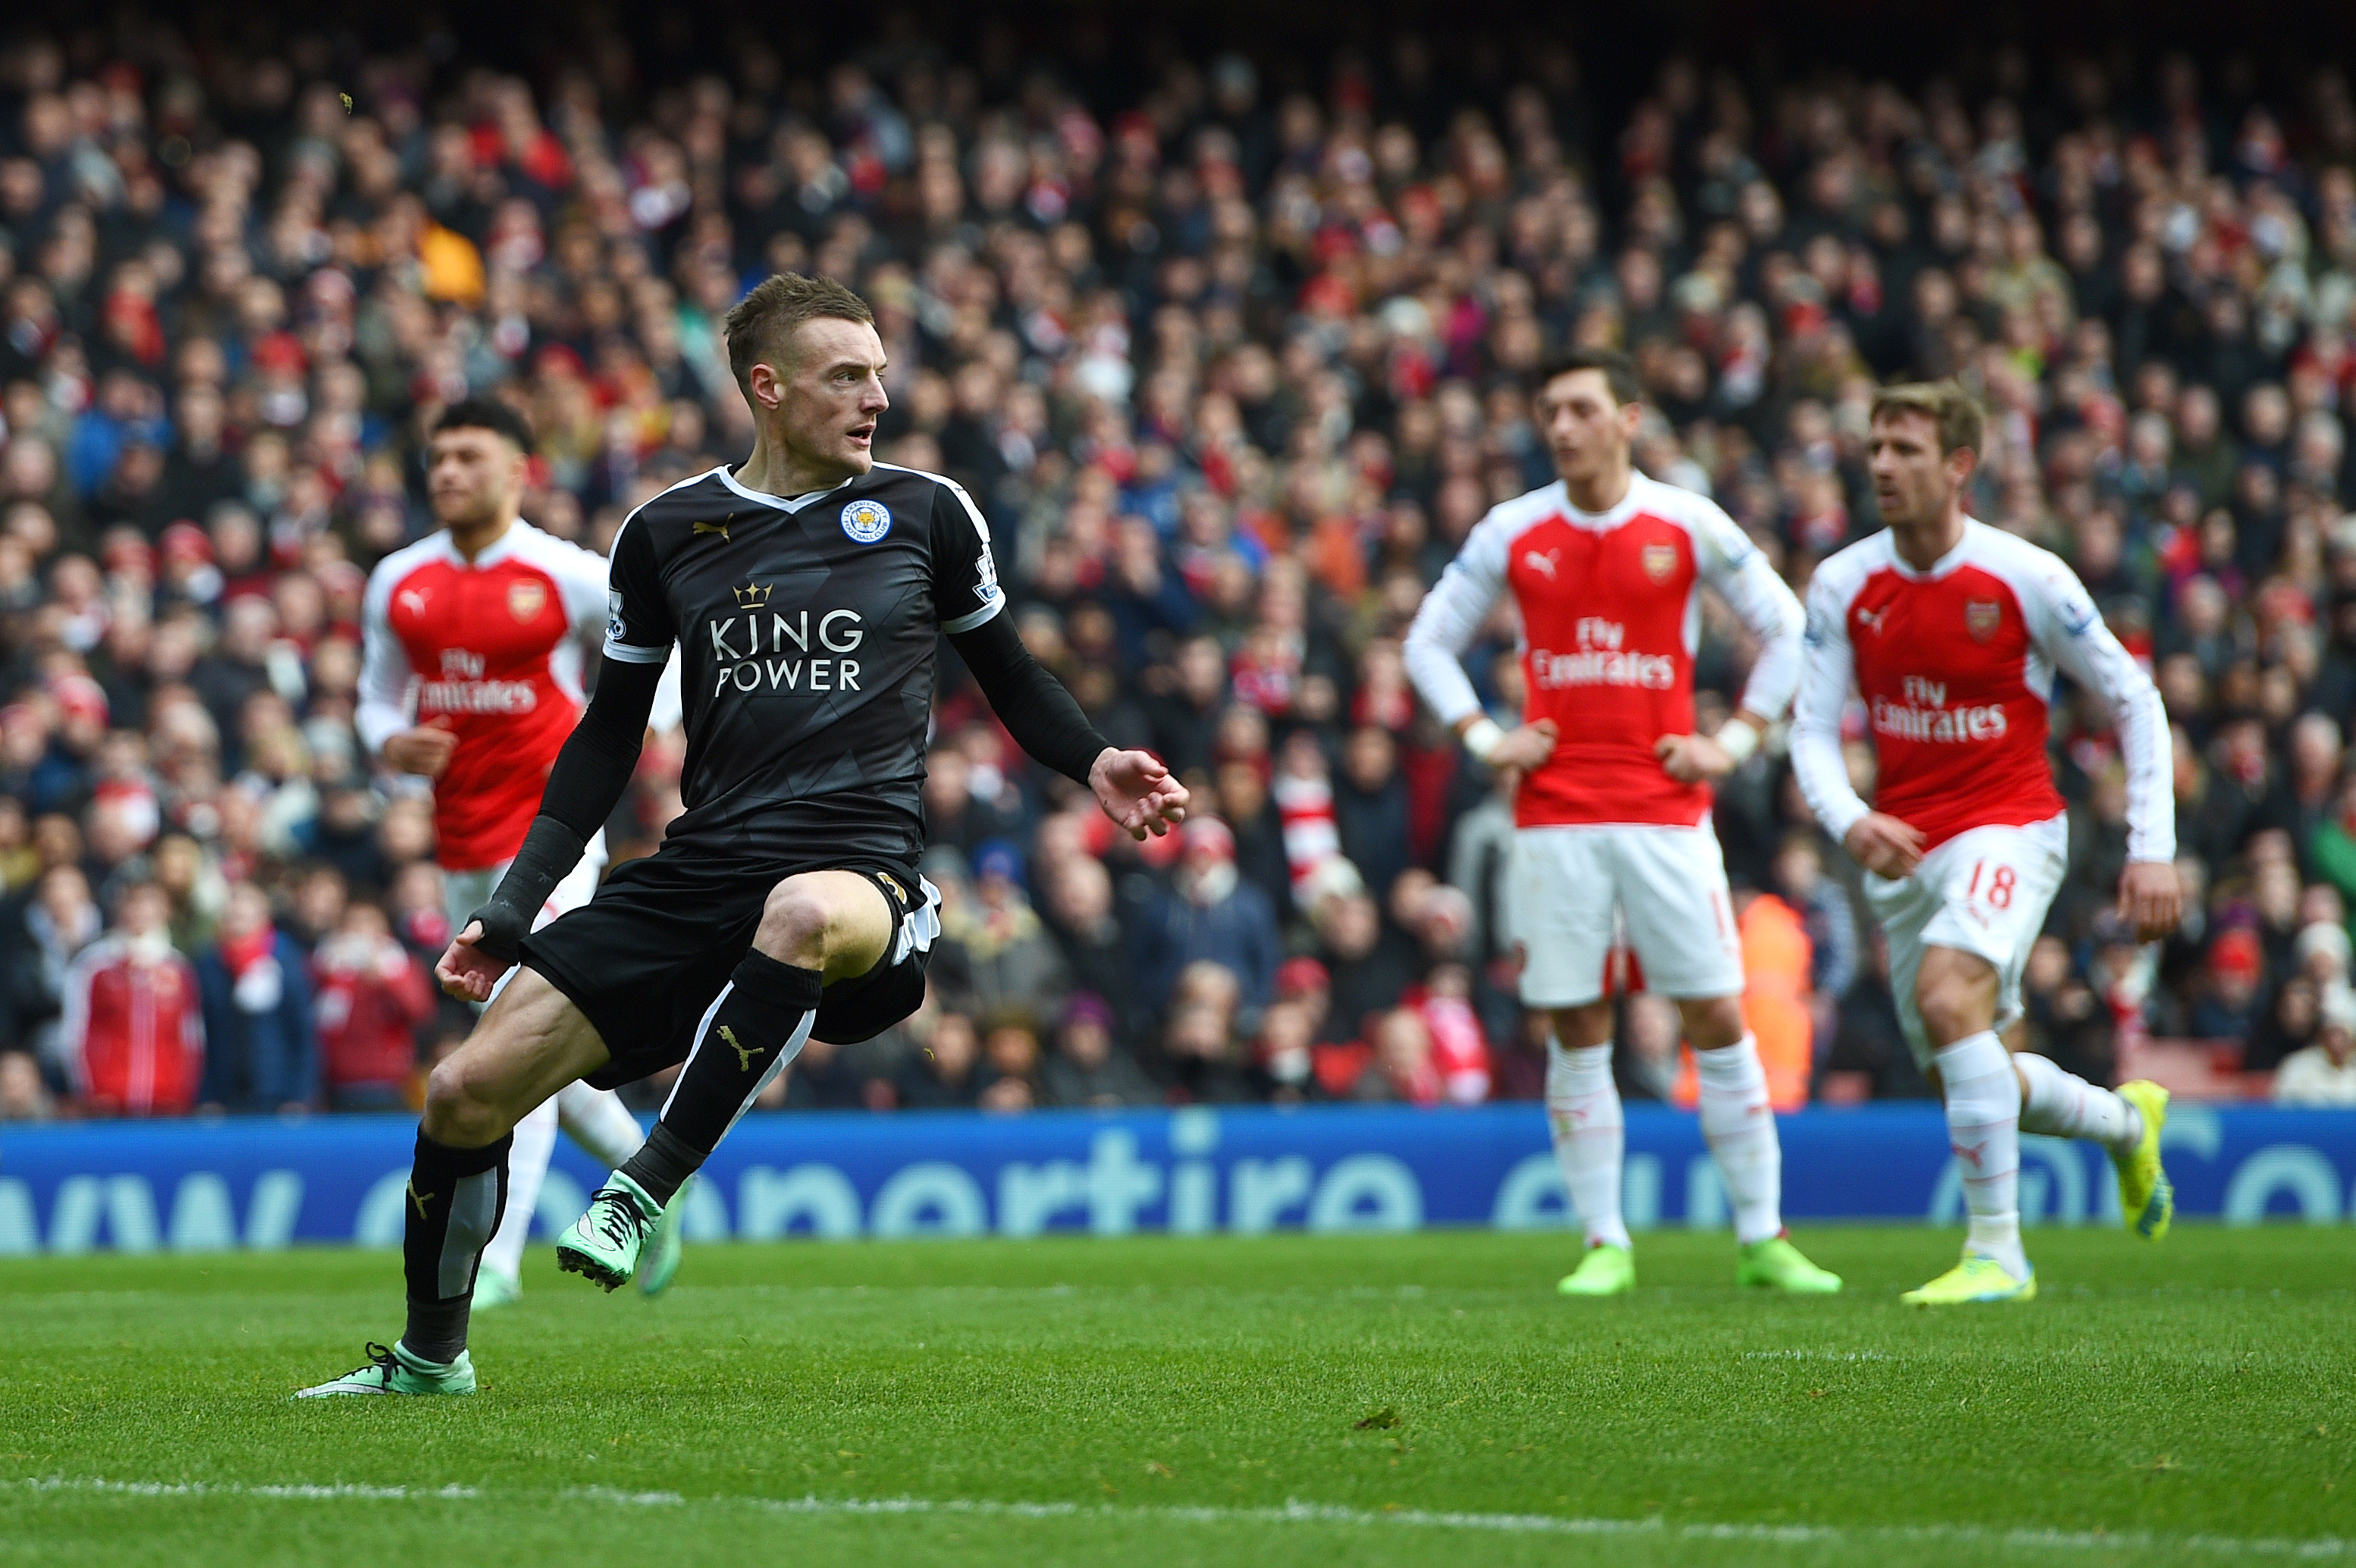 LONDON, ENGLAND - FEBRUARY 14:  Jamie Vardy of Leicester City celebrates after scoring the opening goal from the penalty spot during the Barclays Premier League match between Arsenal and Leicester City at Emirates Stadium on February 14, 2016 in London, England.  (Photo by Ross Kinnaird/Getty Images)